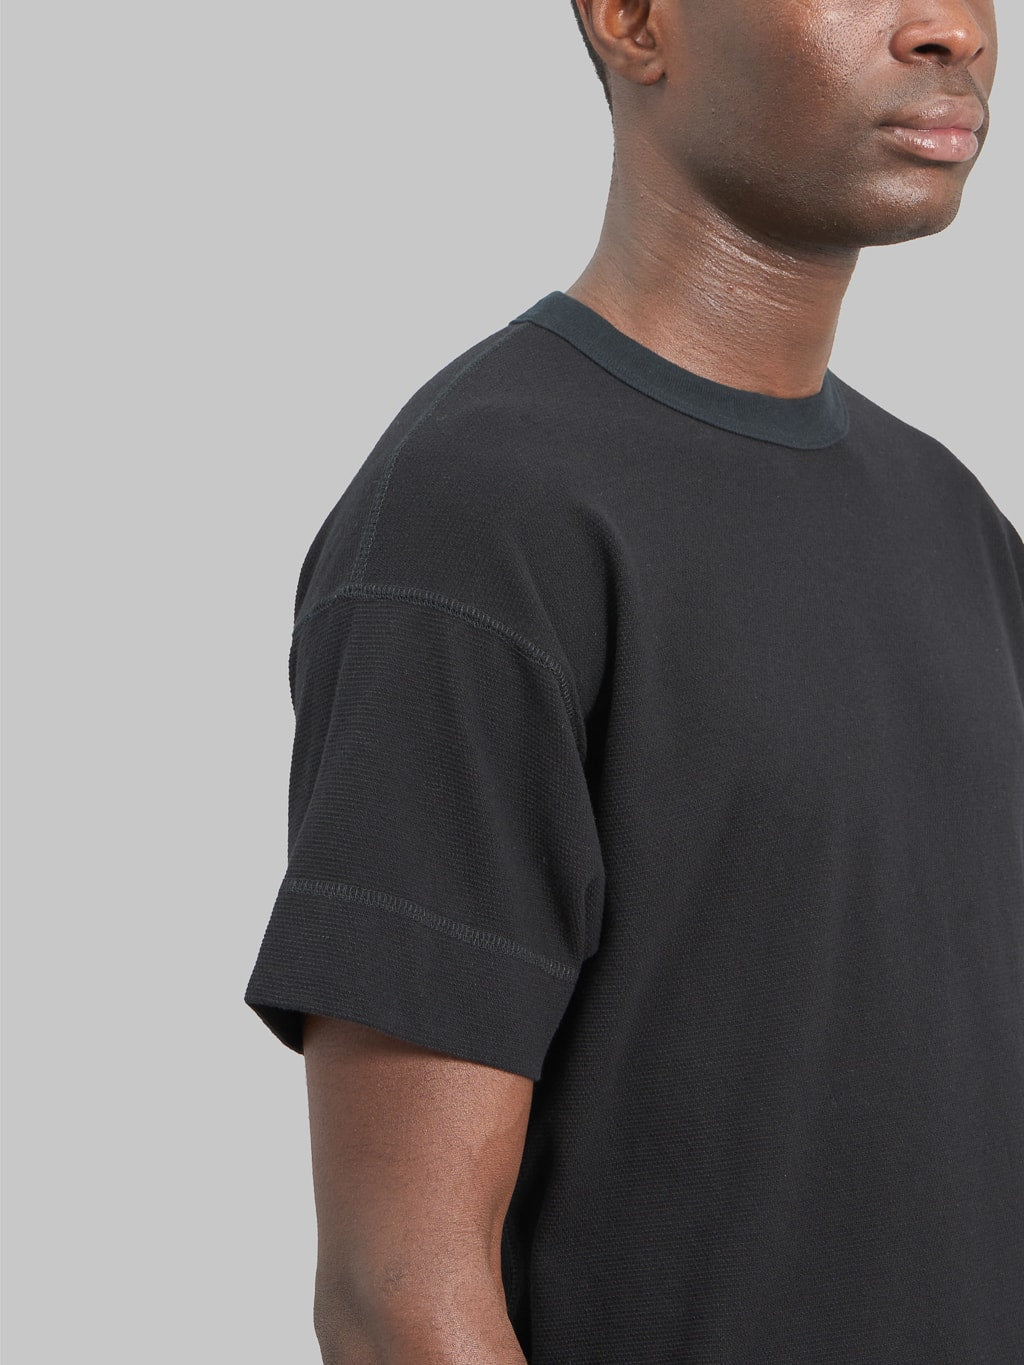 Trophy Clothing Utility Mil Tee black chest details